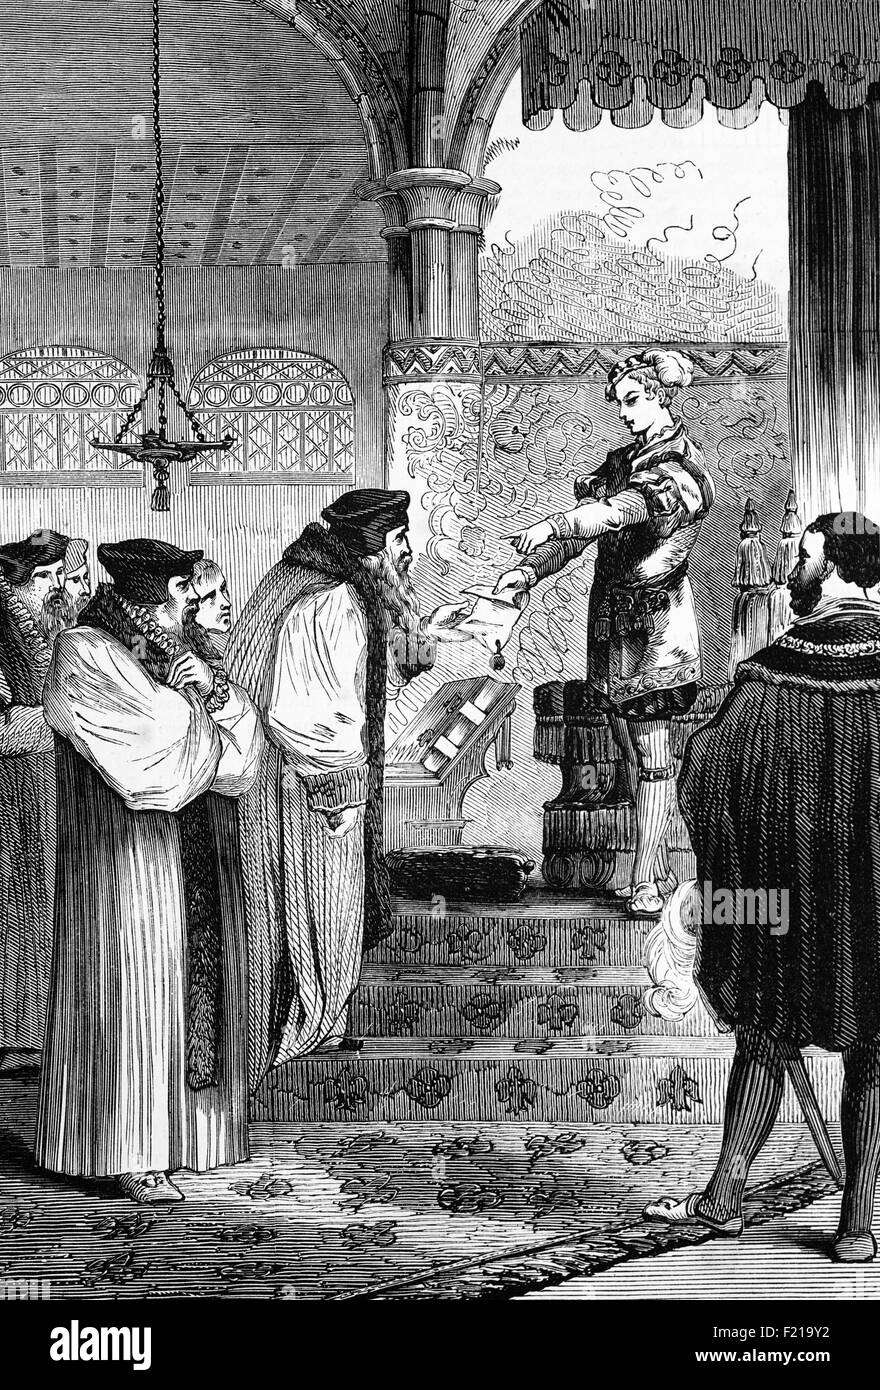 Edward VI presenting the warrant for the arrest of Joan Bocher, an English Anabaptist, to Cardinal Cranmer. Her first conflict with church and state came after she spoke against the sacrament of the altar. She was arrested as a heretic in 1548 and convicted in April 1549. During her imprisonment various well-known religious figures were enlisted to try to persuade her to recant to no avail. She was burned at the stake for heresy in Smithfield, London, 2nd  May 1550. Stock Photo